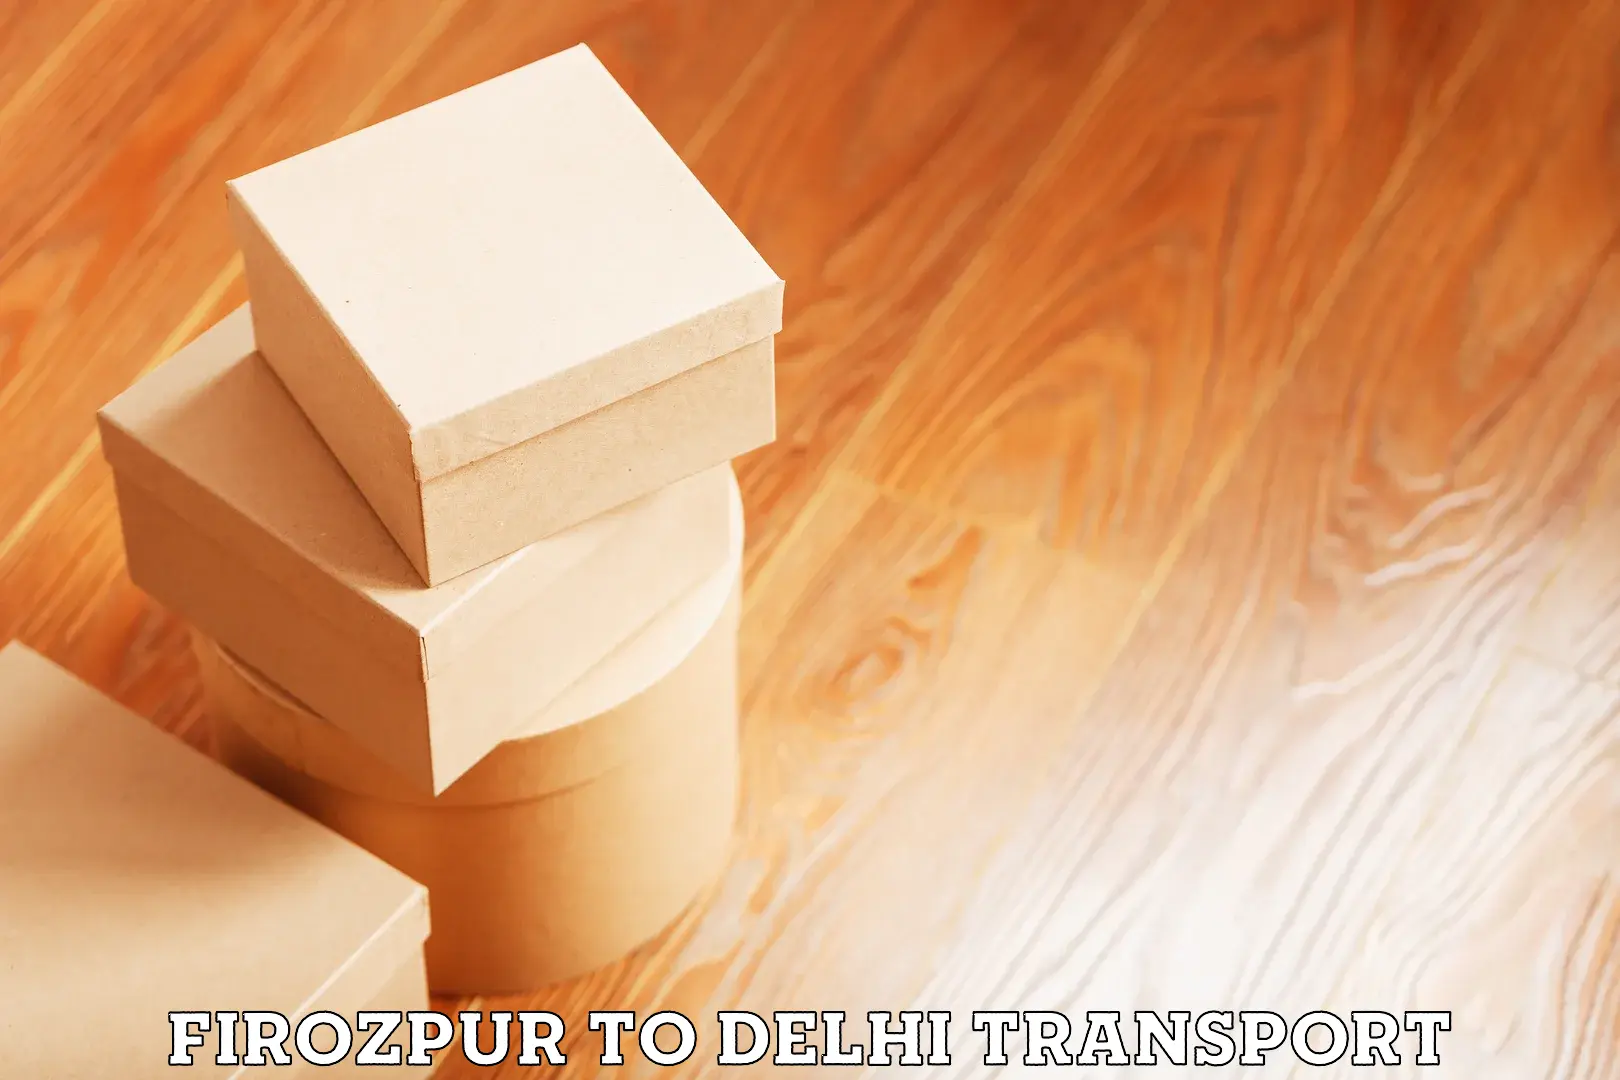 International cargo transportation services Firozpur to Lodhi Road